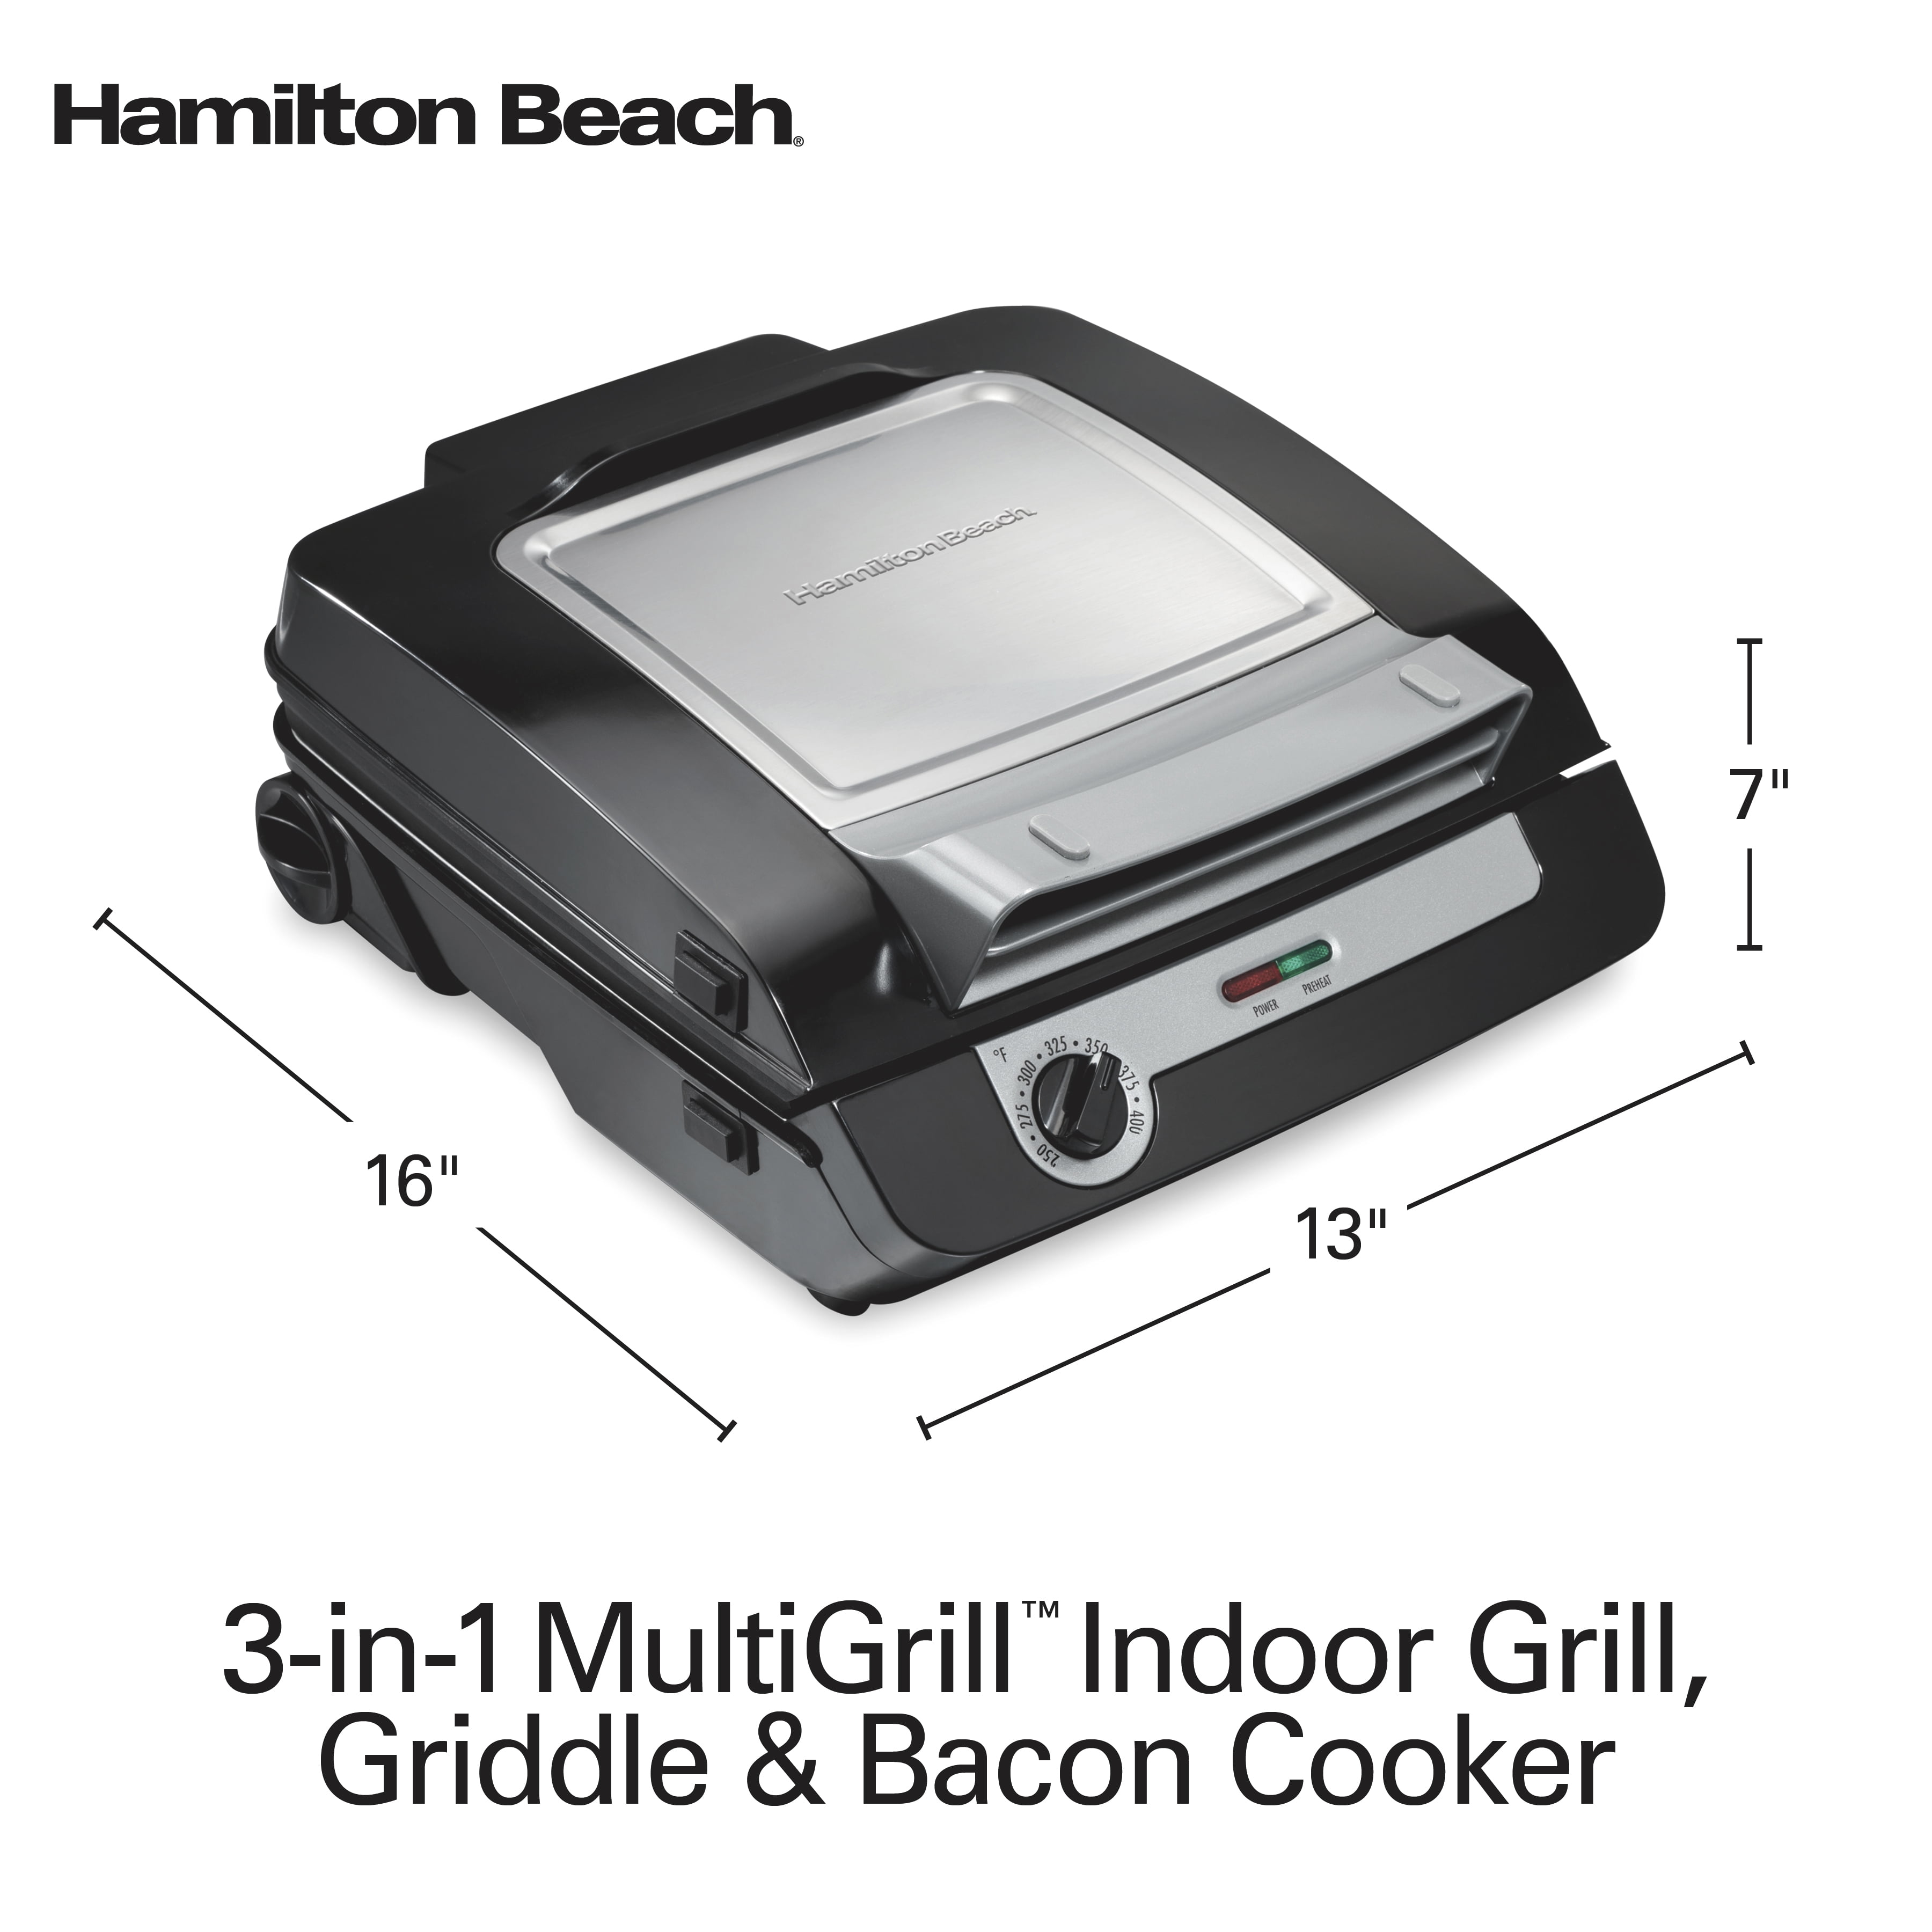 Hamilton Beach 3-in-1 Grill/Griddle is on sale for $35.99 at